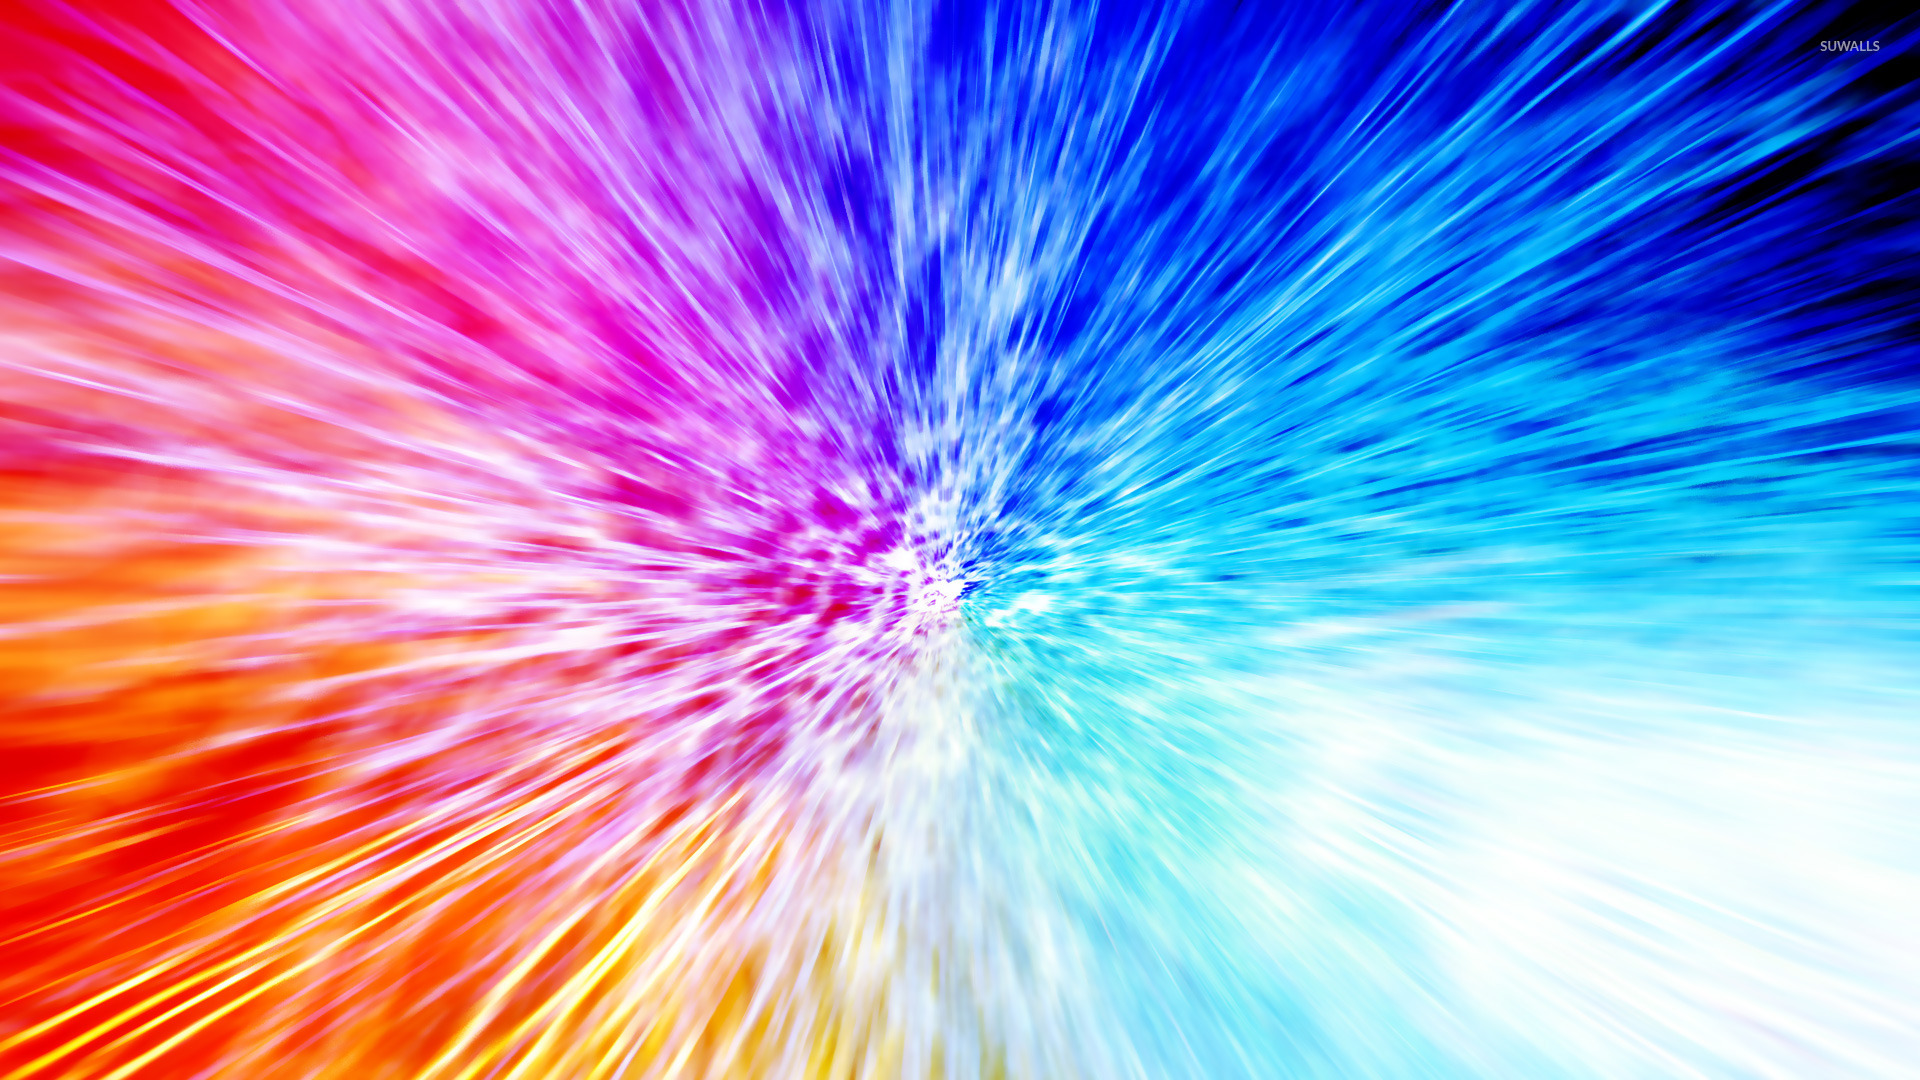 Colorful Burst Wallpaper Abstract Wallpapers 11870 Images, Photos, Reviews